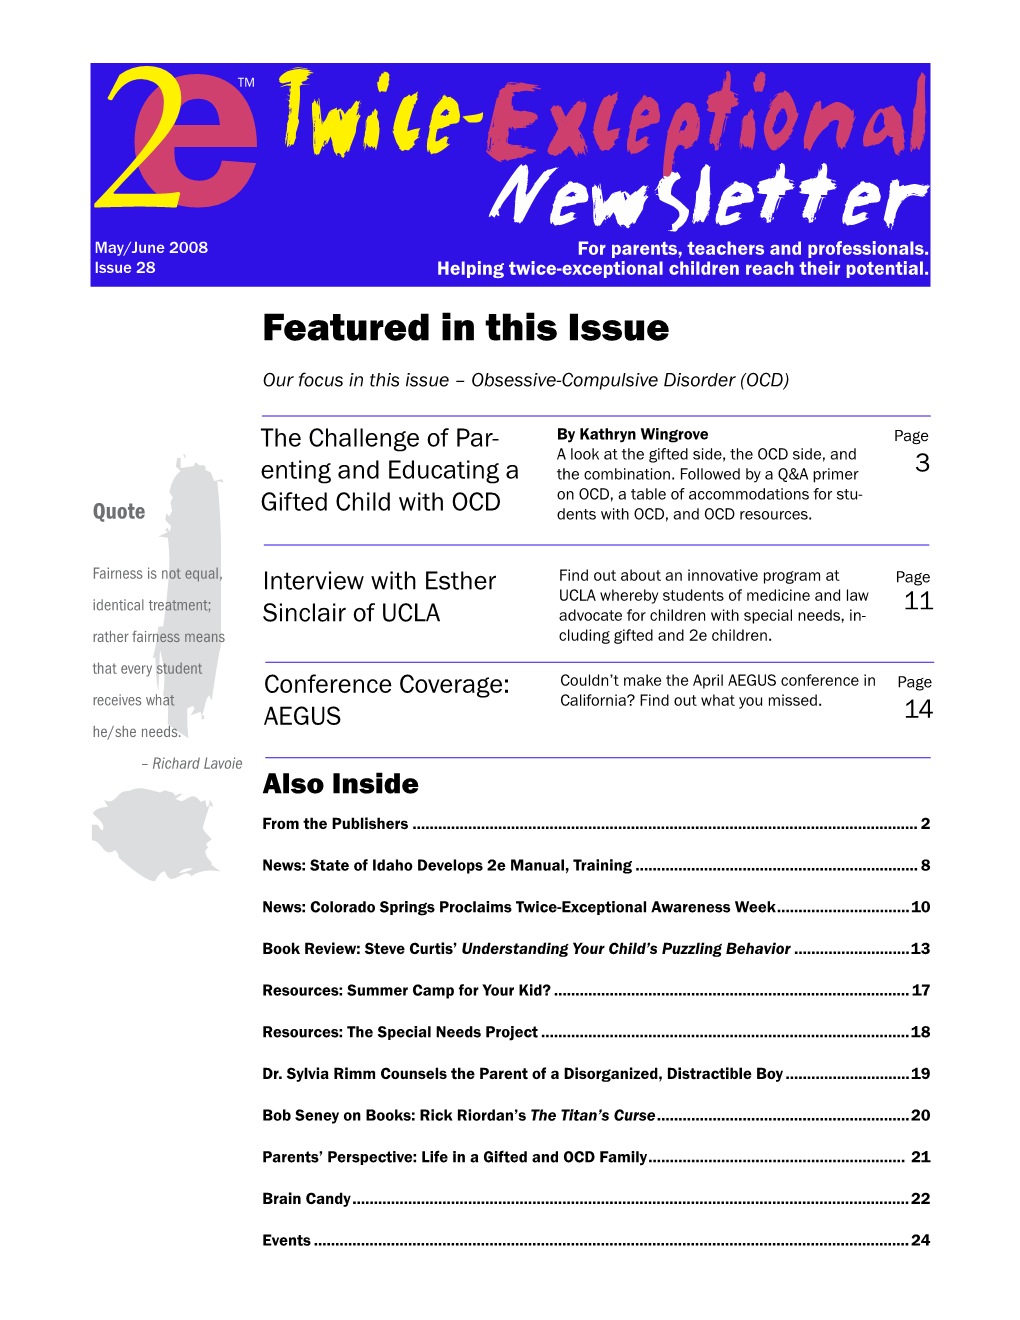 Twice-Exceptional Newsletter 2May/June 2008 for Parents, Teachers and Professionals